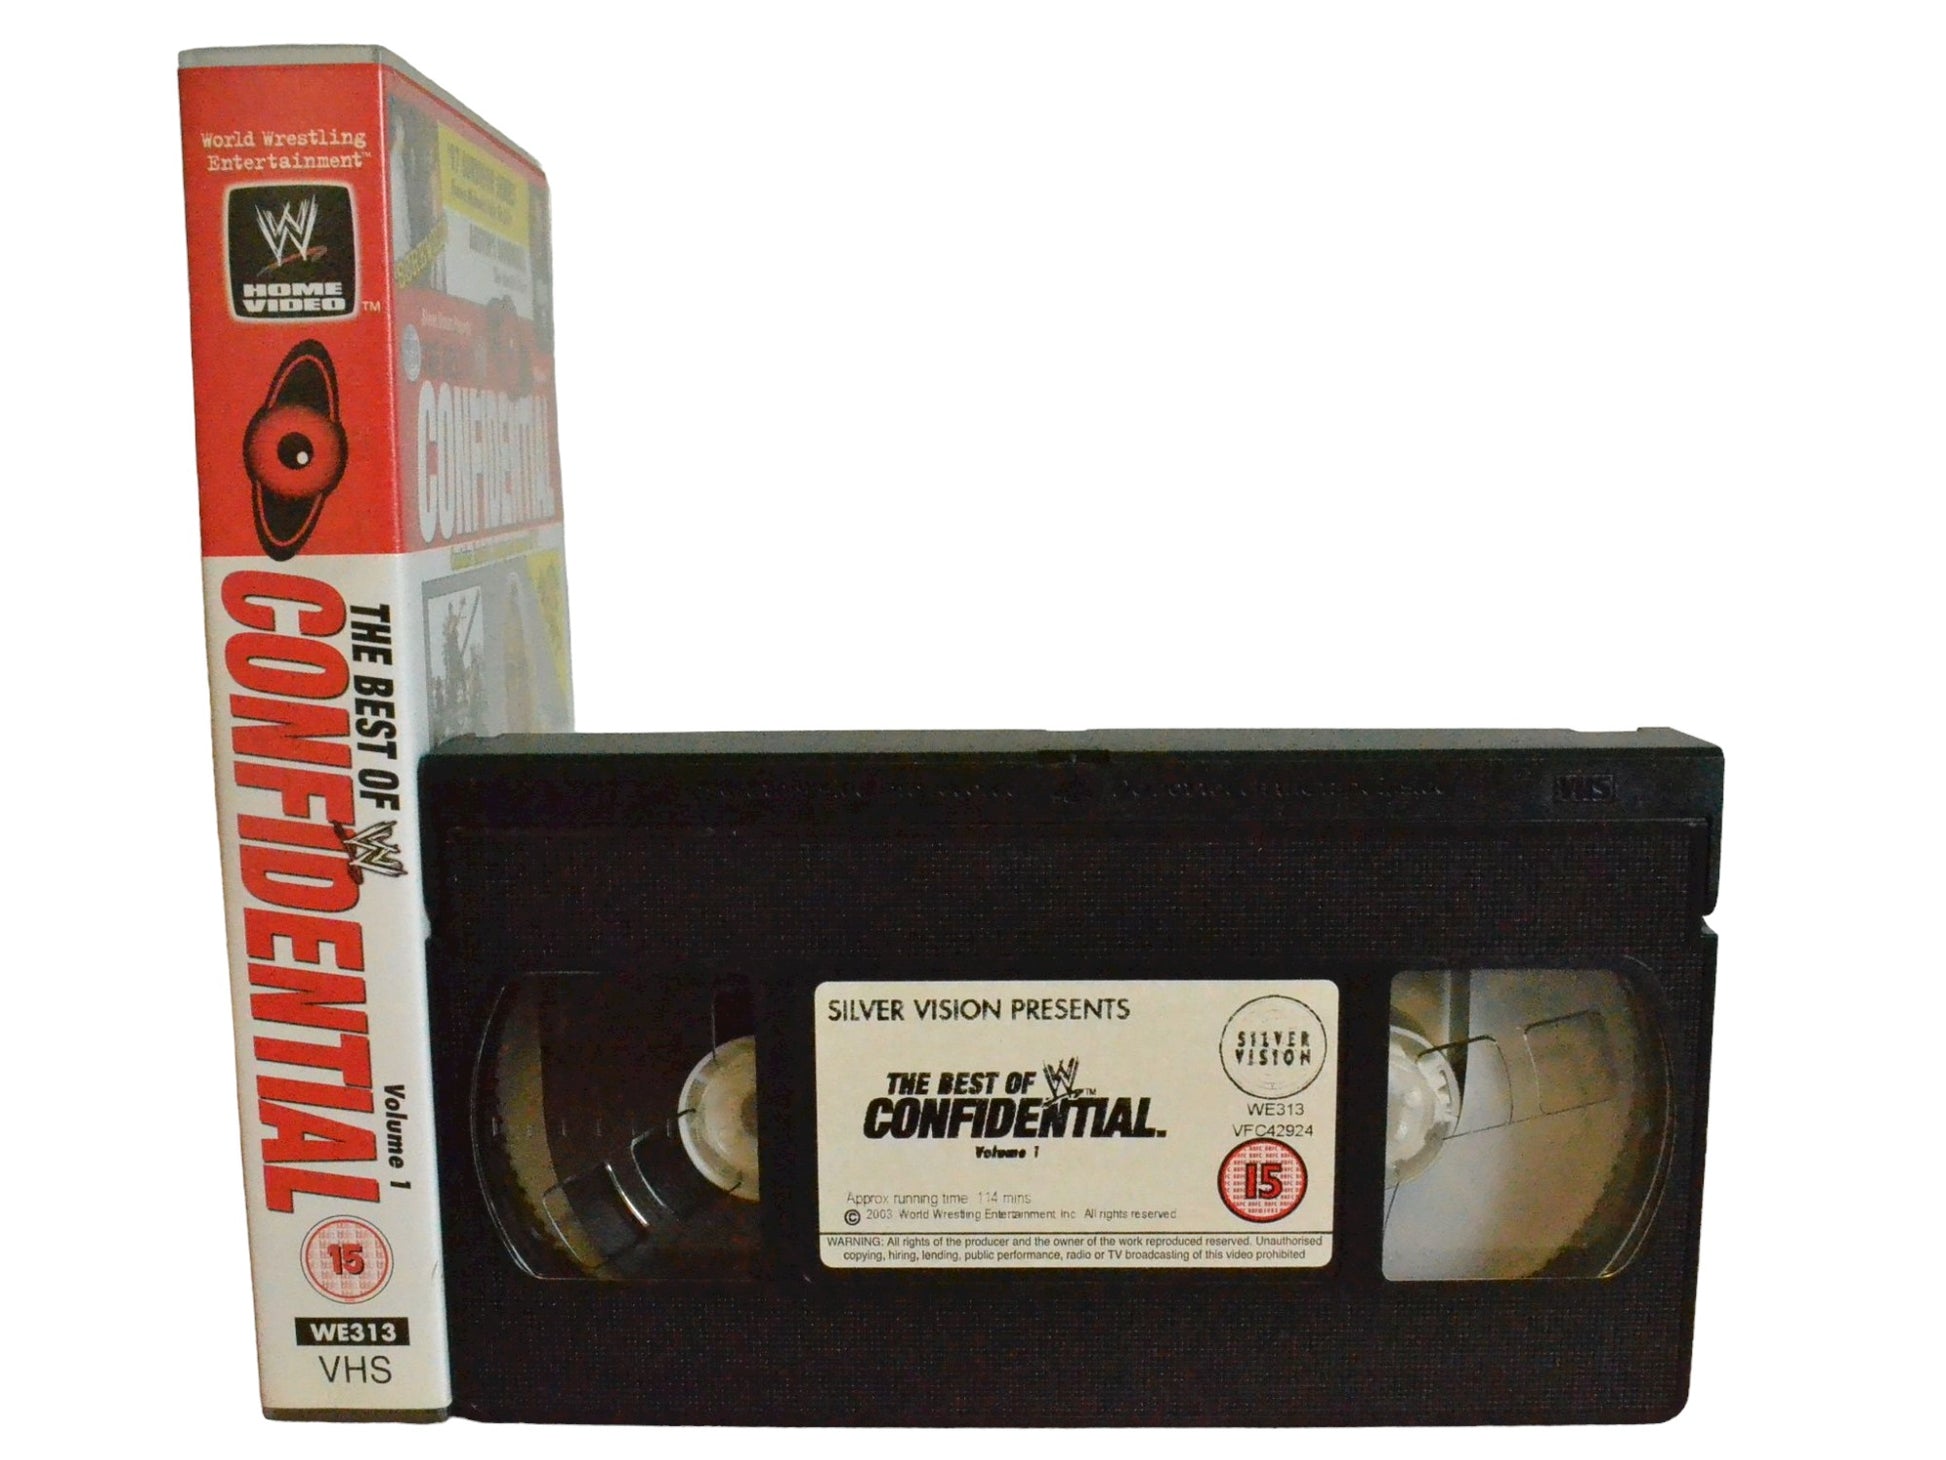 WWE: Best of Confidential: Vol. 1 - World Wrestling Entertainment Home Video - Wrestling - PAL - VHS-